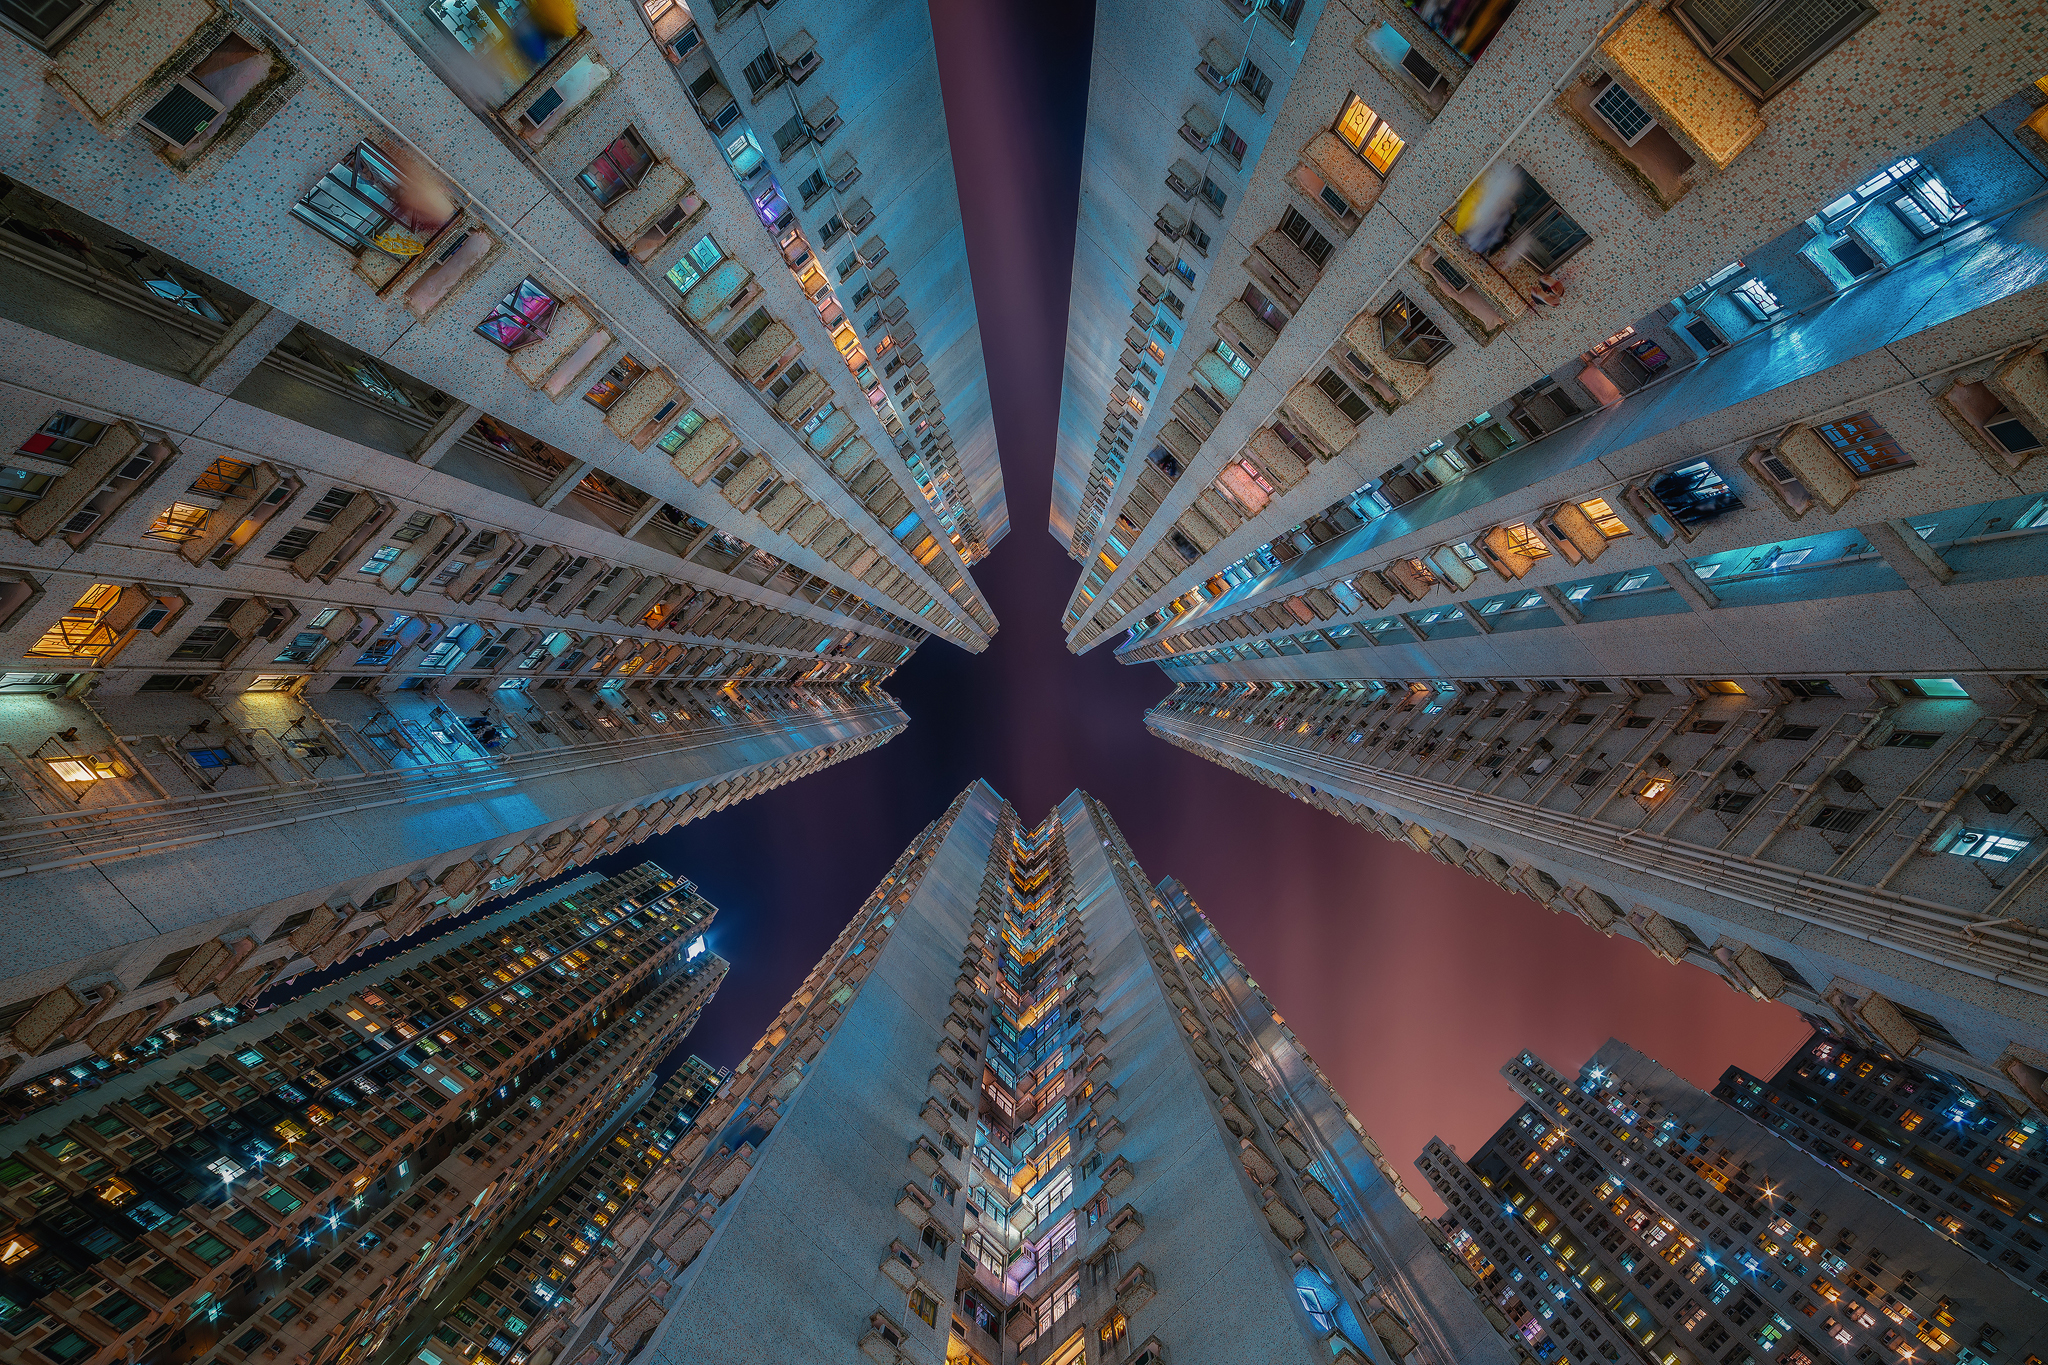 Infinite Lines & Architecture of Hong Kong